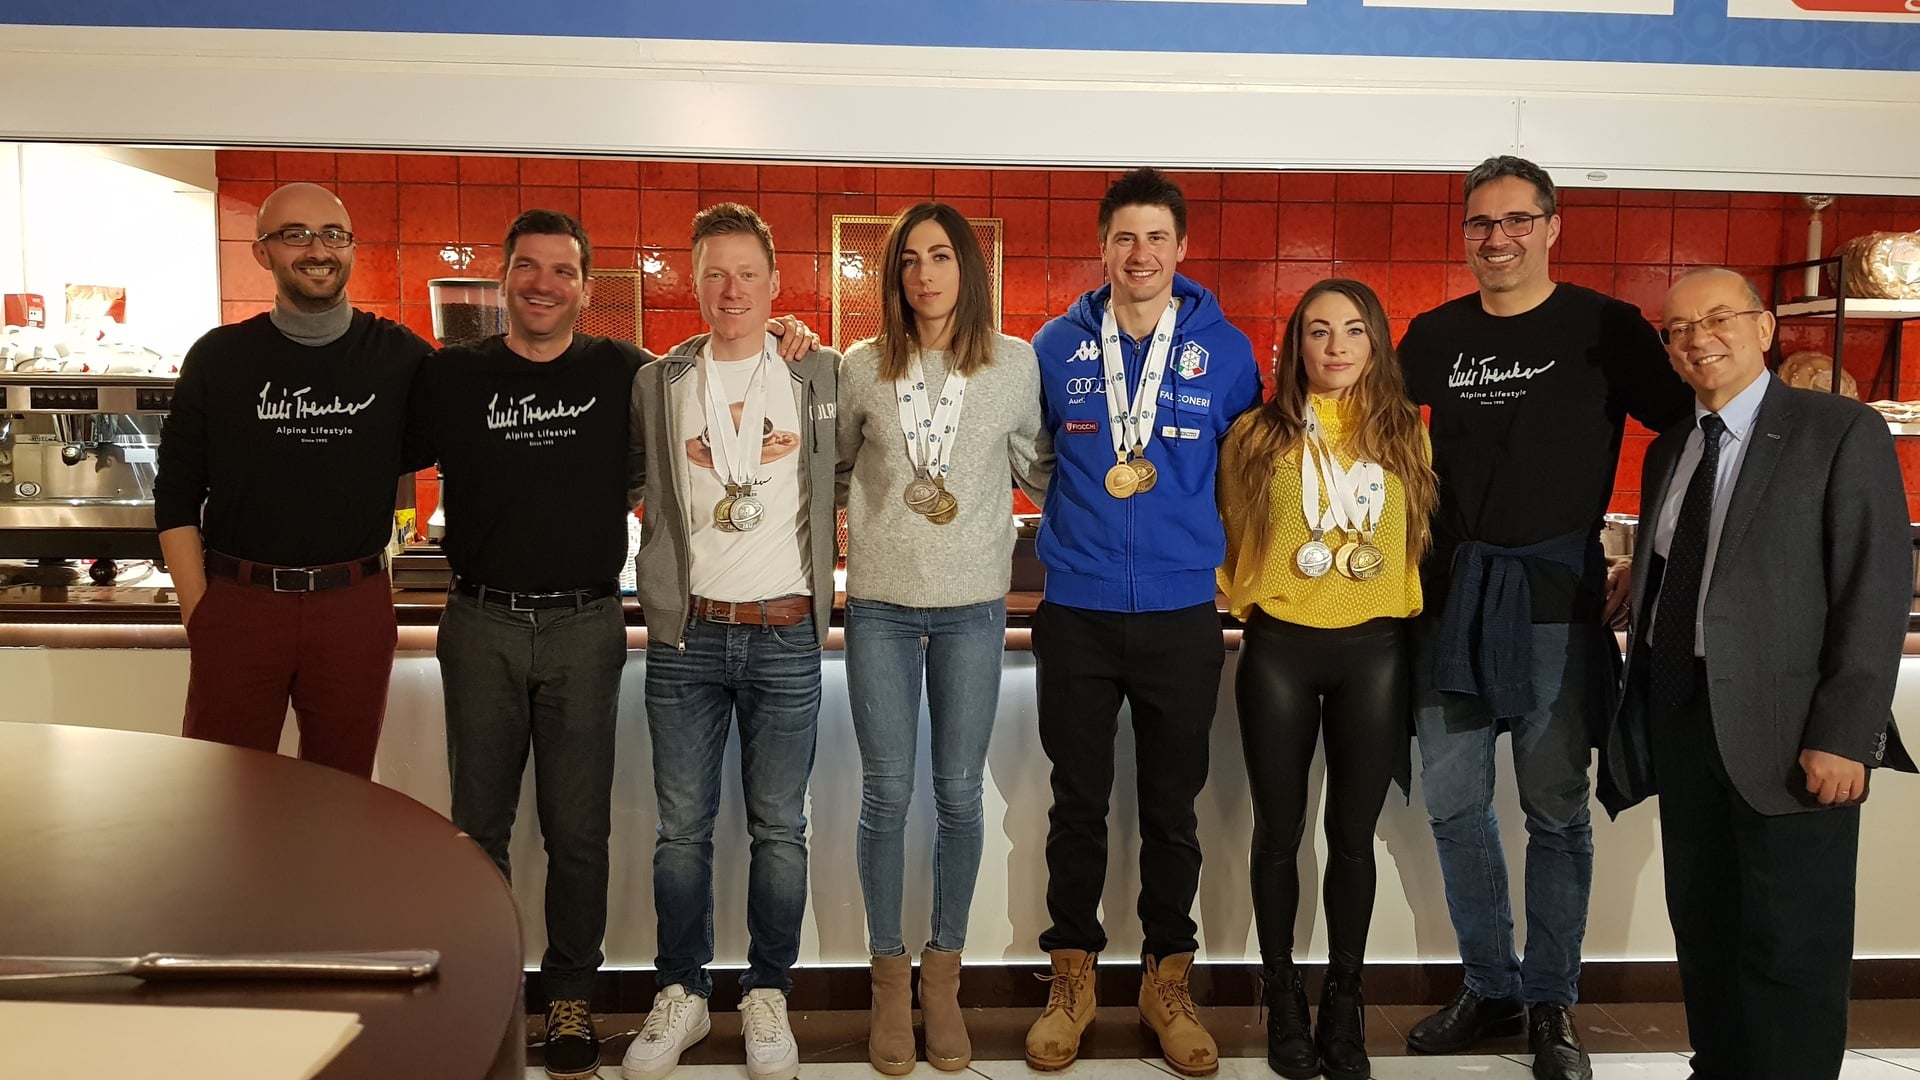 17.03.2019 - Big final party at Antholz House with all the Italian medalists of the Östersund World Championship